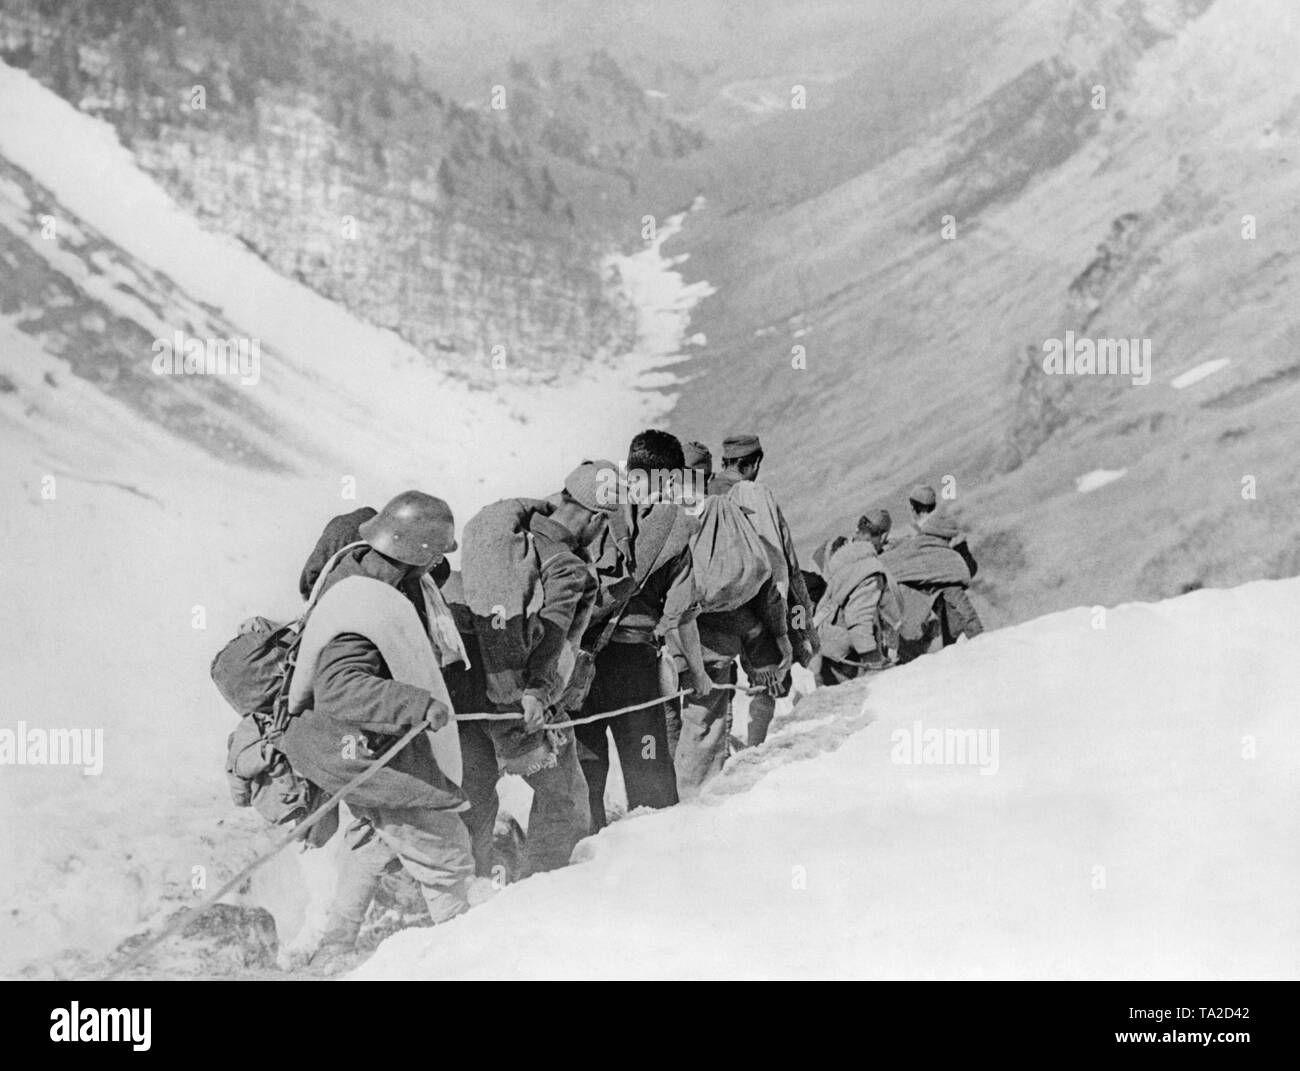 Photo of a group of Republican fighters descending a mountainside in the Pyrenees with full field kit forming a clique. Early in 1939, more than 5,000 Republican soldiers fled to France, partly on steep mountain trails over the Pyrenees from the Aragon front and the advancing Spanish national troops. Stock Photo